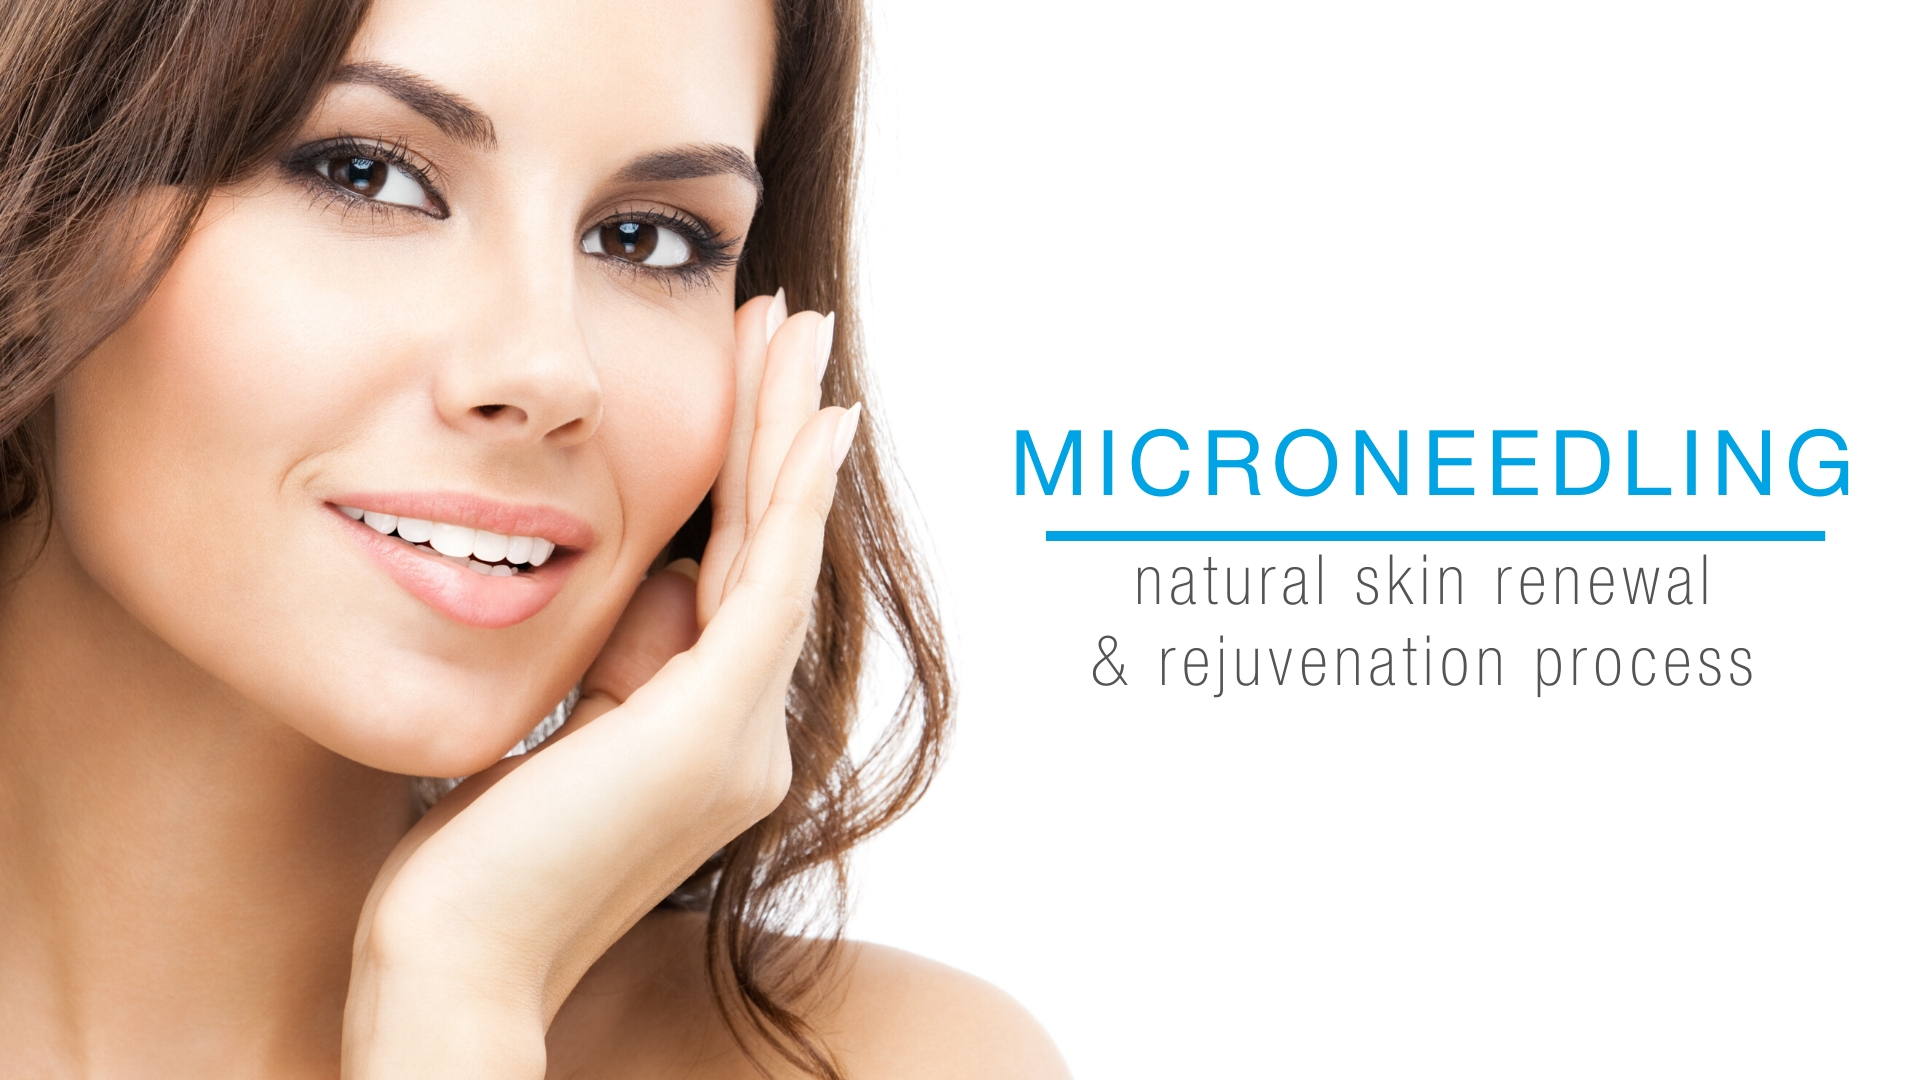 Lovely woman smiling with rejuvenated skin from microneedling.